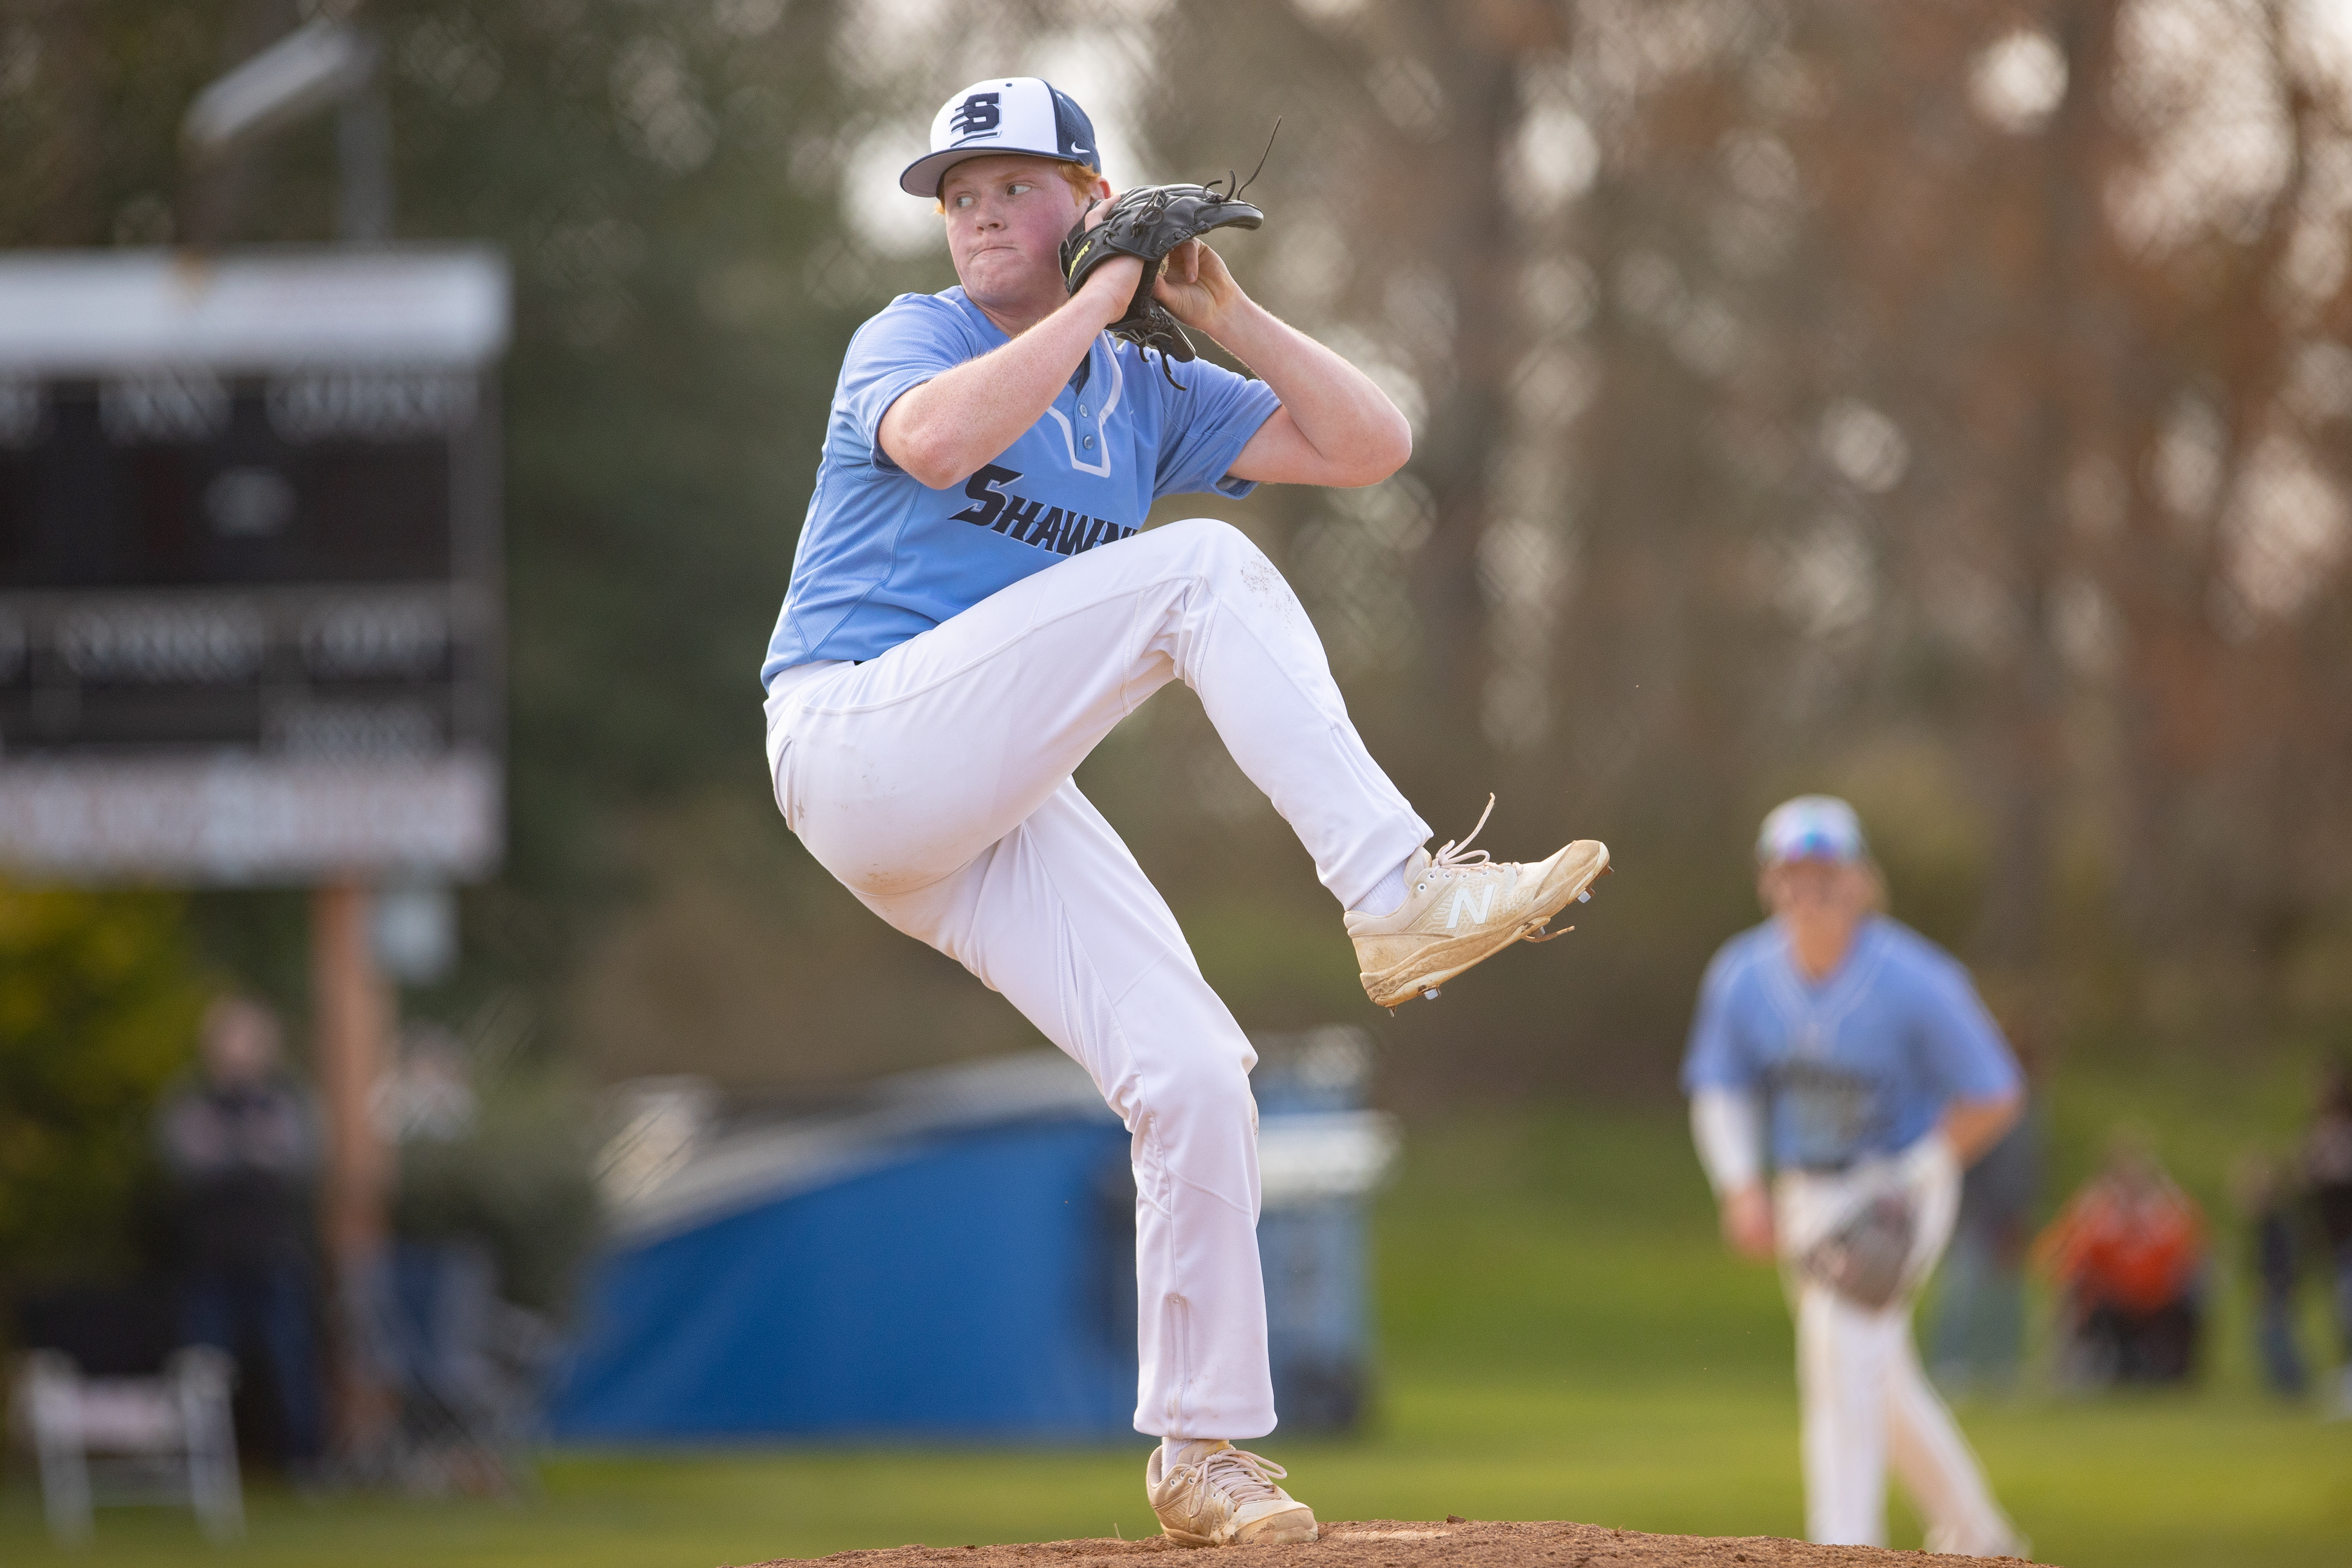 James Vlastaris (11) of Shawnee, winds up to pitch in Marlton, NJ on Monday, April 3, 2023.